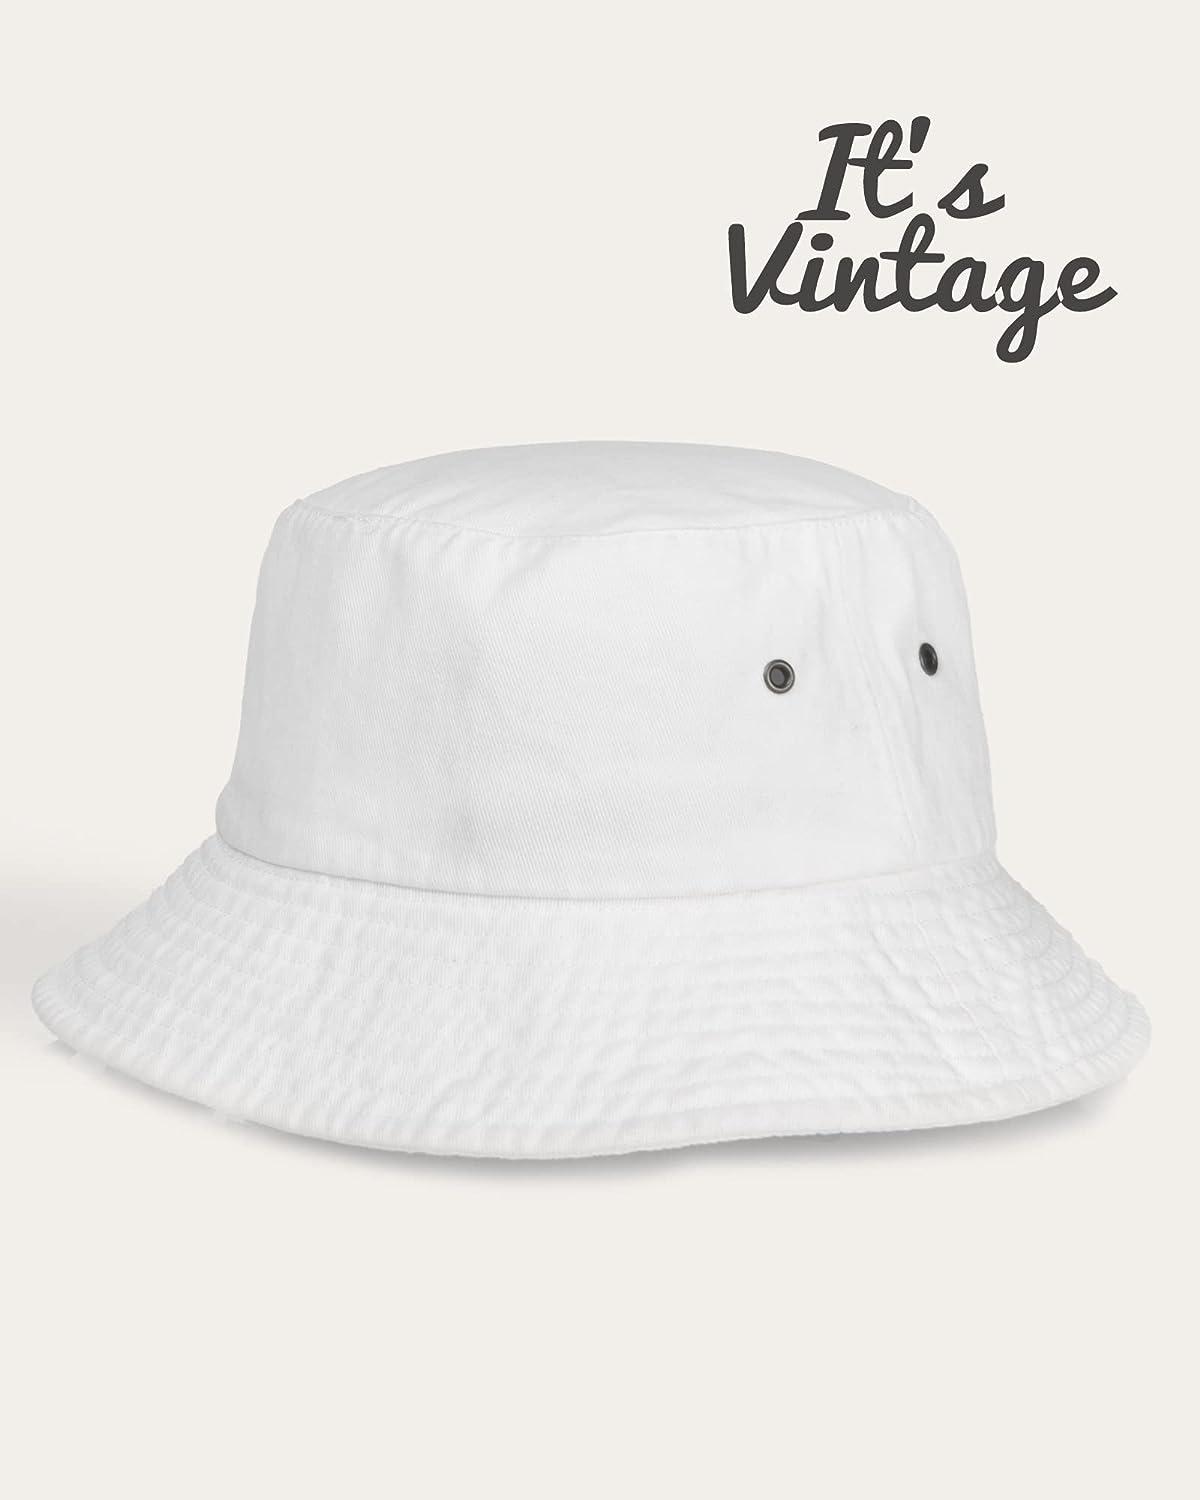 Bucket Hat for Women Men Canvas Washed Cotton Trendy Distressed